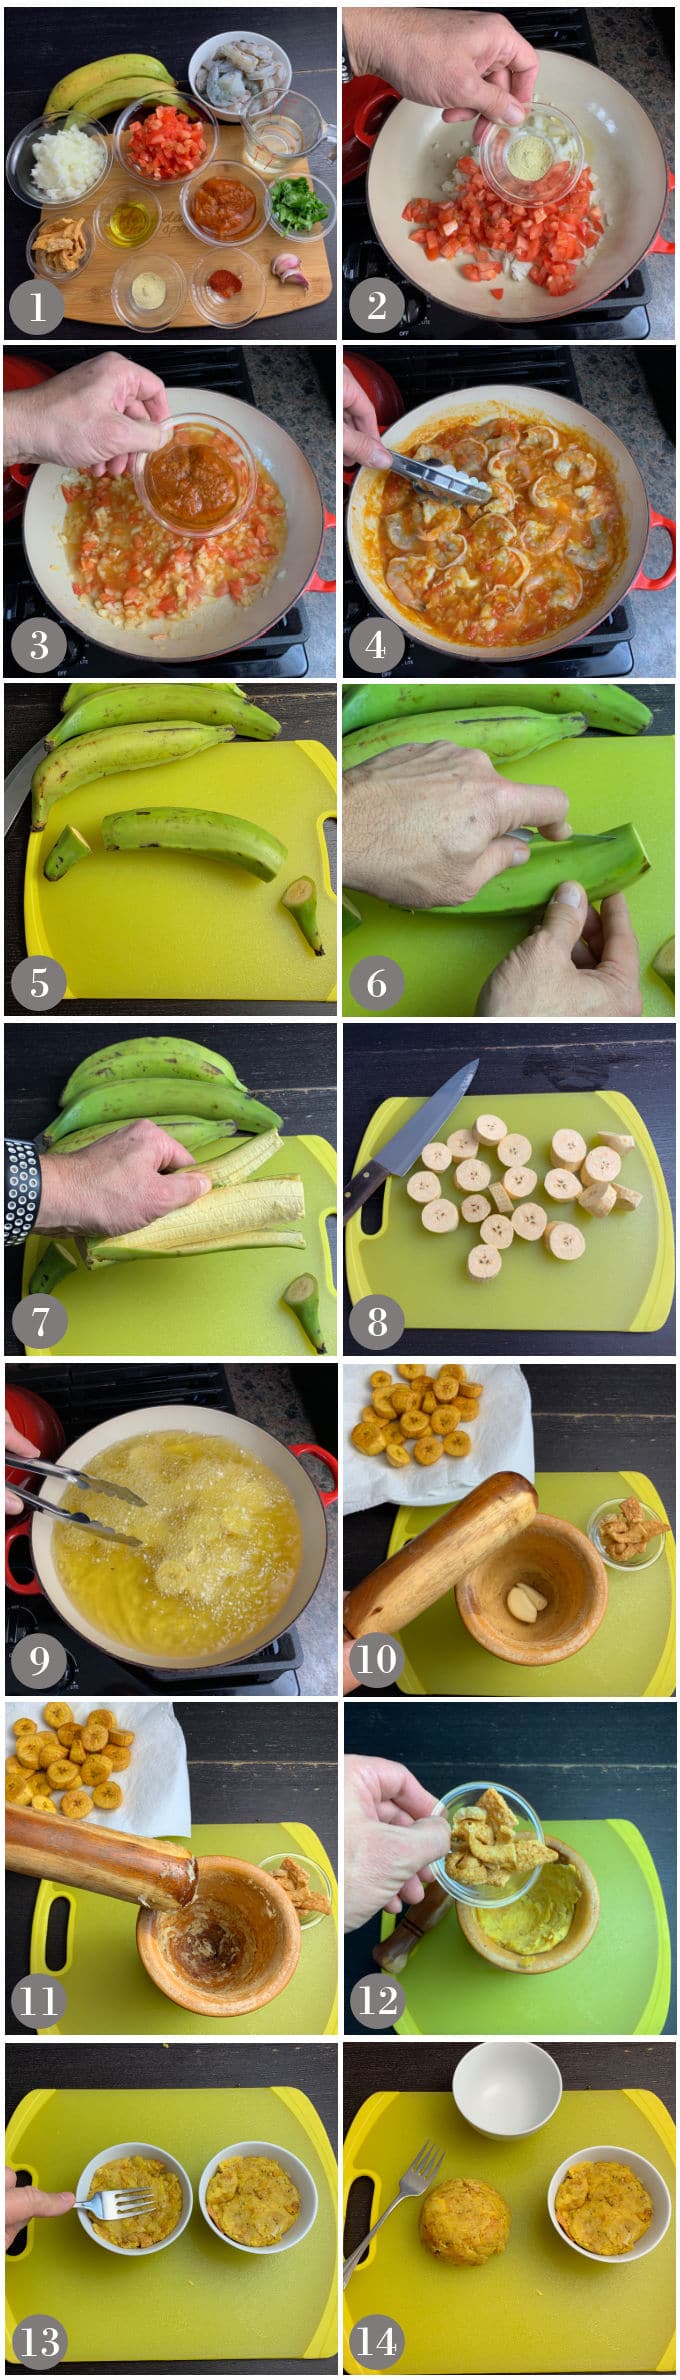 A collage of photos showing the steps to make shrimp in a sauce and fry plantains to make mofongo.